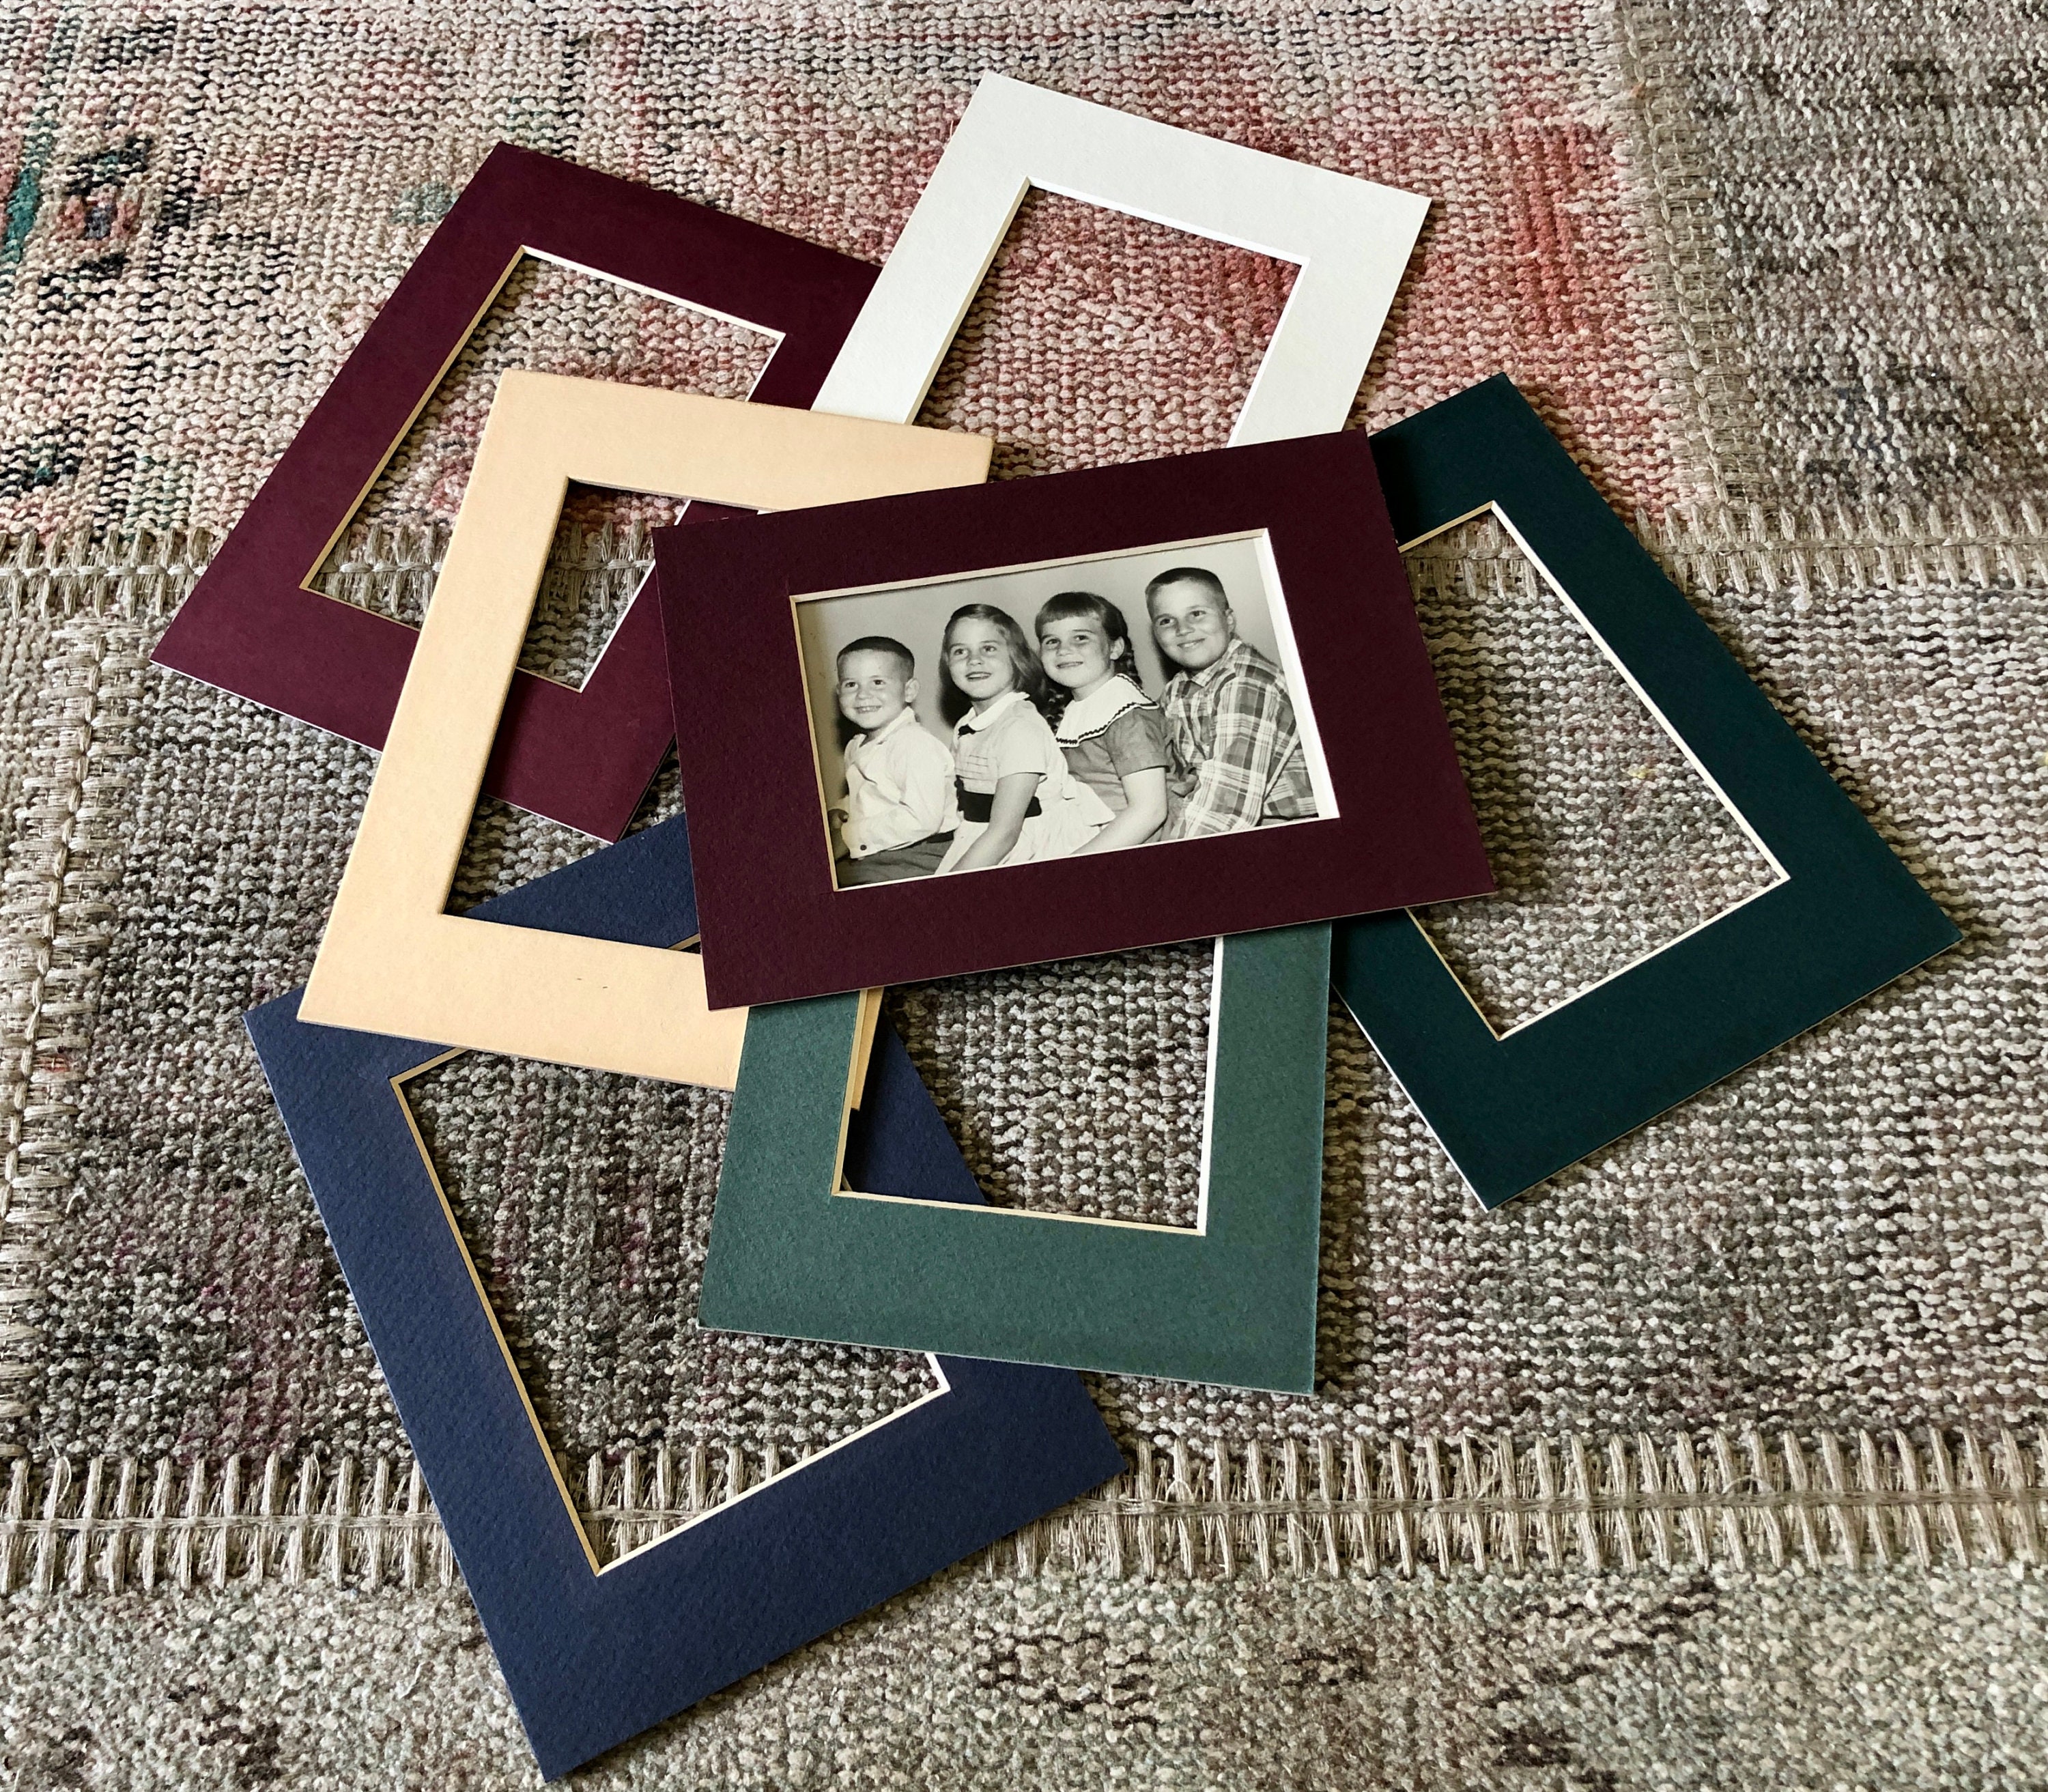  5x7 Mat for 4x6 Photo - Precut Deep Red Picture Matboard for  Frames Measuring 5 x 7 Inches - Bevel Cut Matte to Display Art Measuring 4  x 6 Inches - Acid Free Pack of 100 MATS